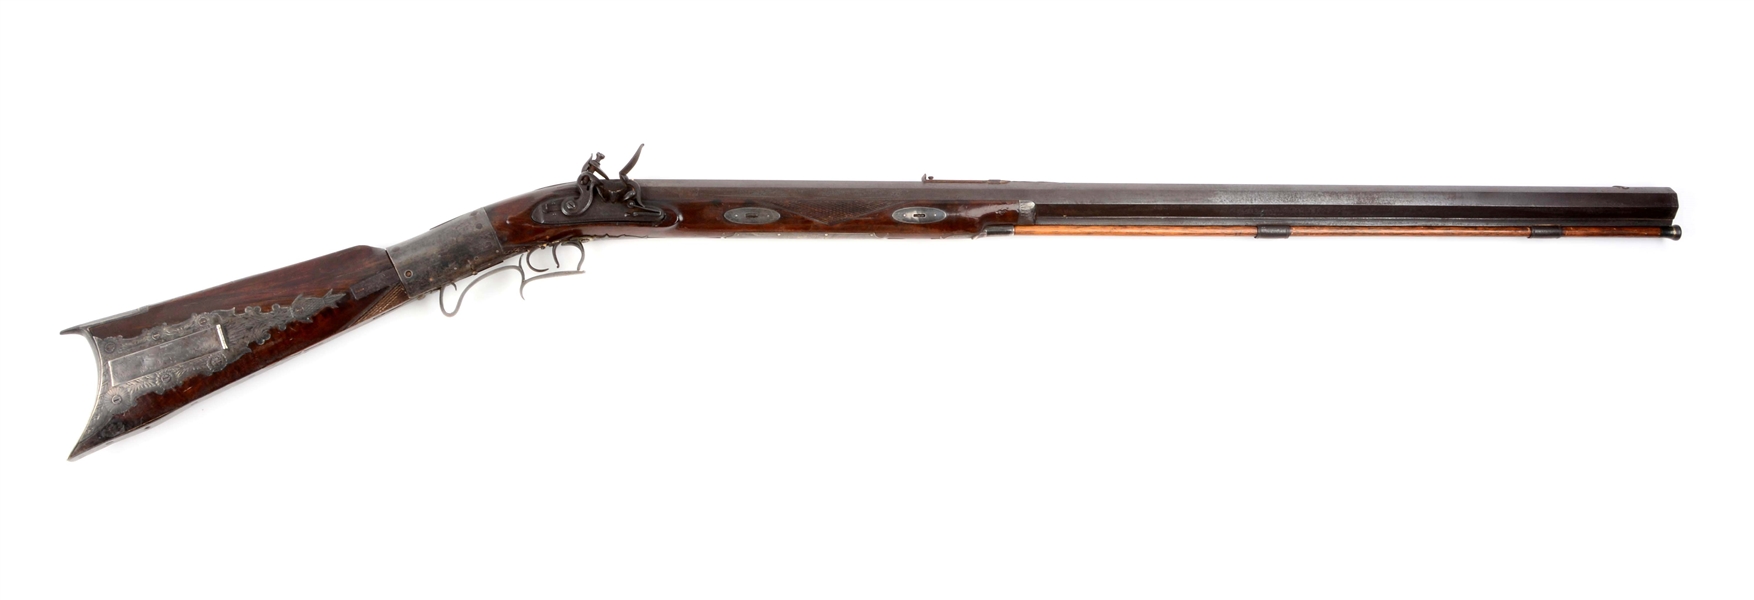 (A) REZIN BOWIES SILVER-MOUNTED FLINTLOCK RIFLE MADE BY BARTLETT OF NEW YORK.